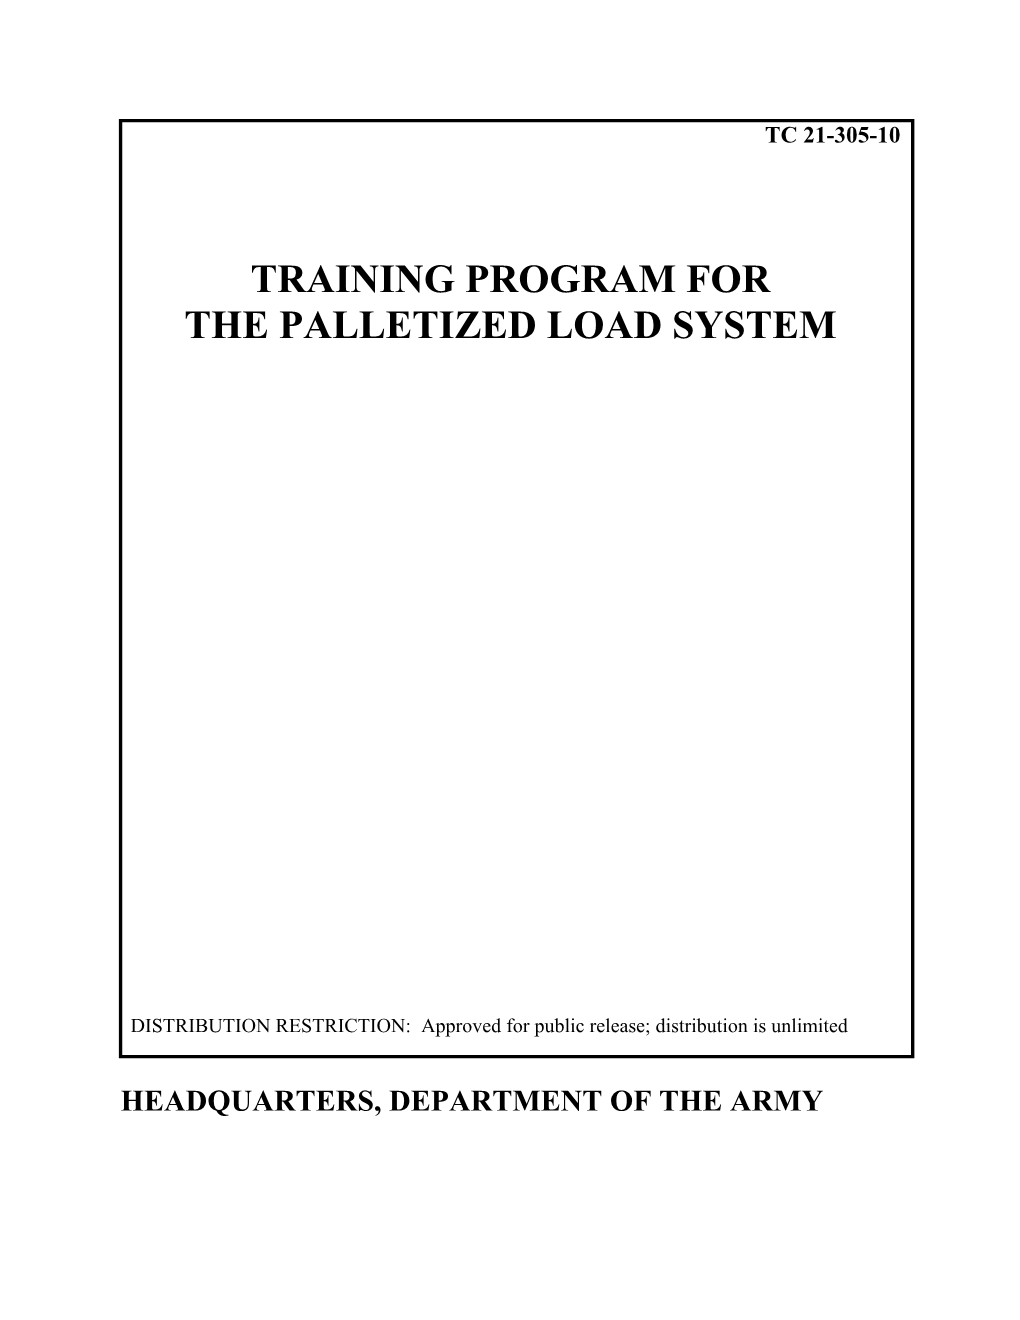 Training Program for the Palletized Load System